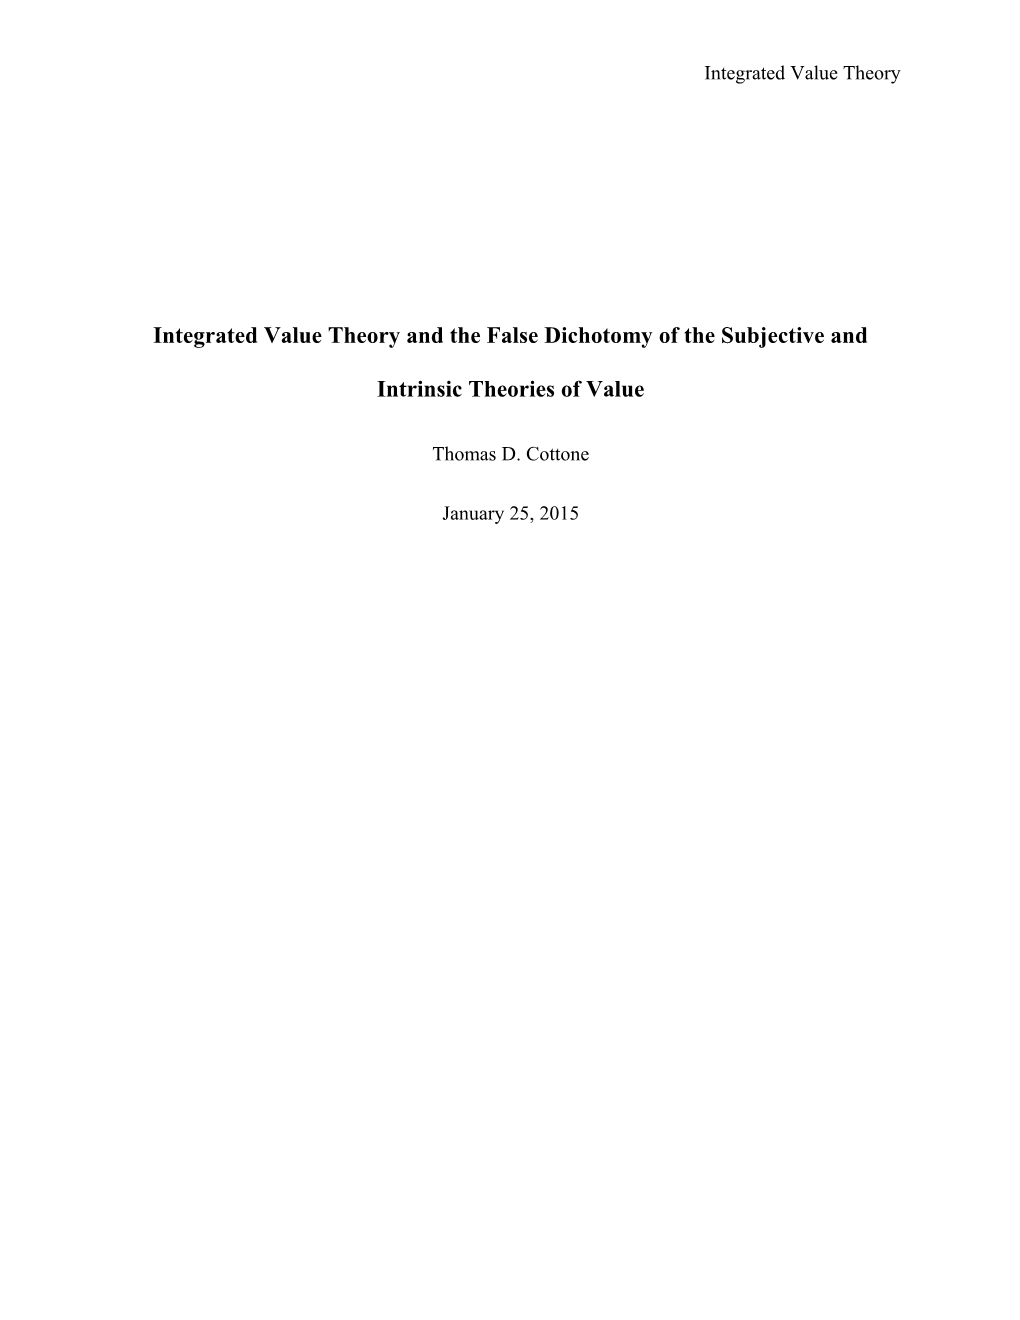 Integrated Value Theory and the Falsedichotomy of the Subjective and Intrinsic Theories